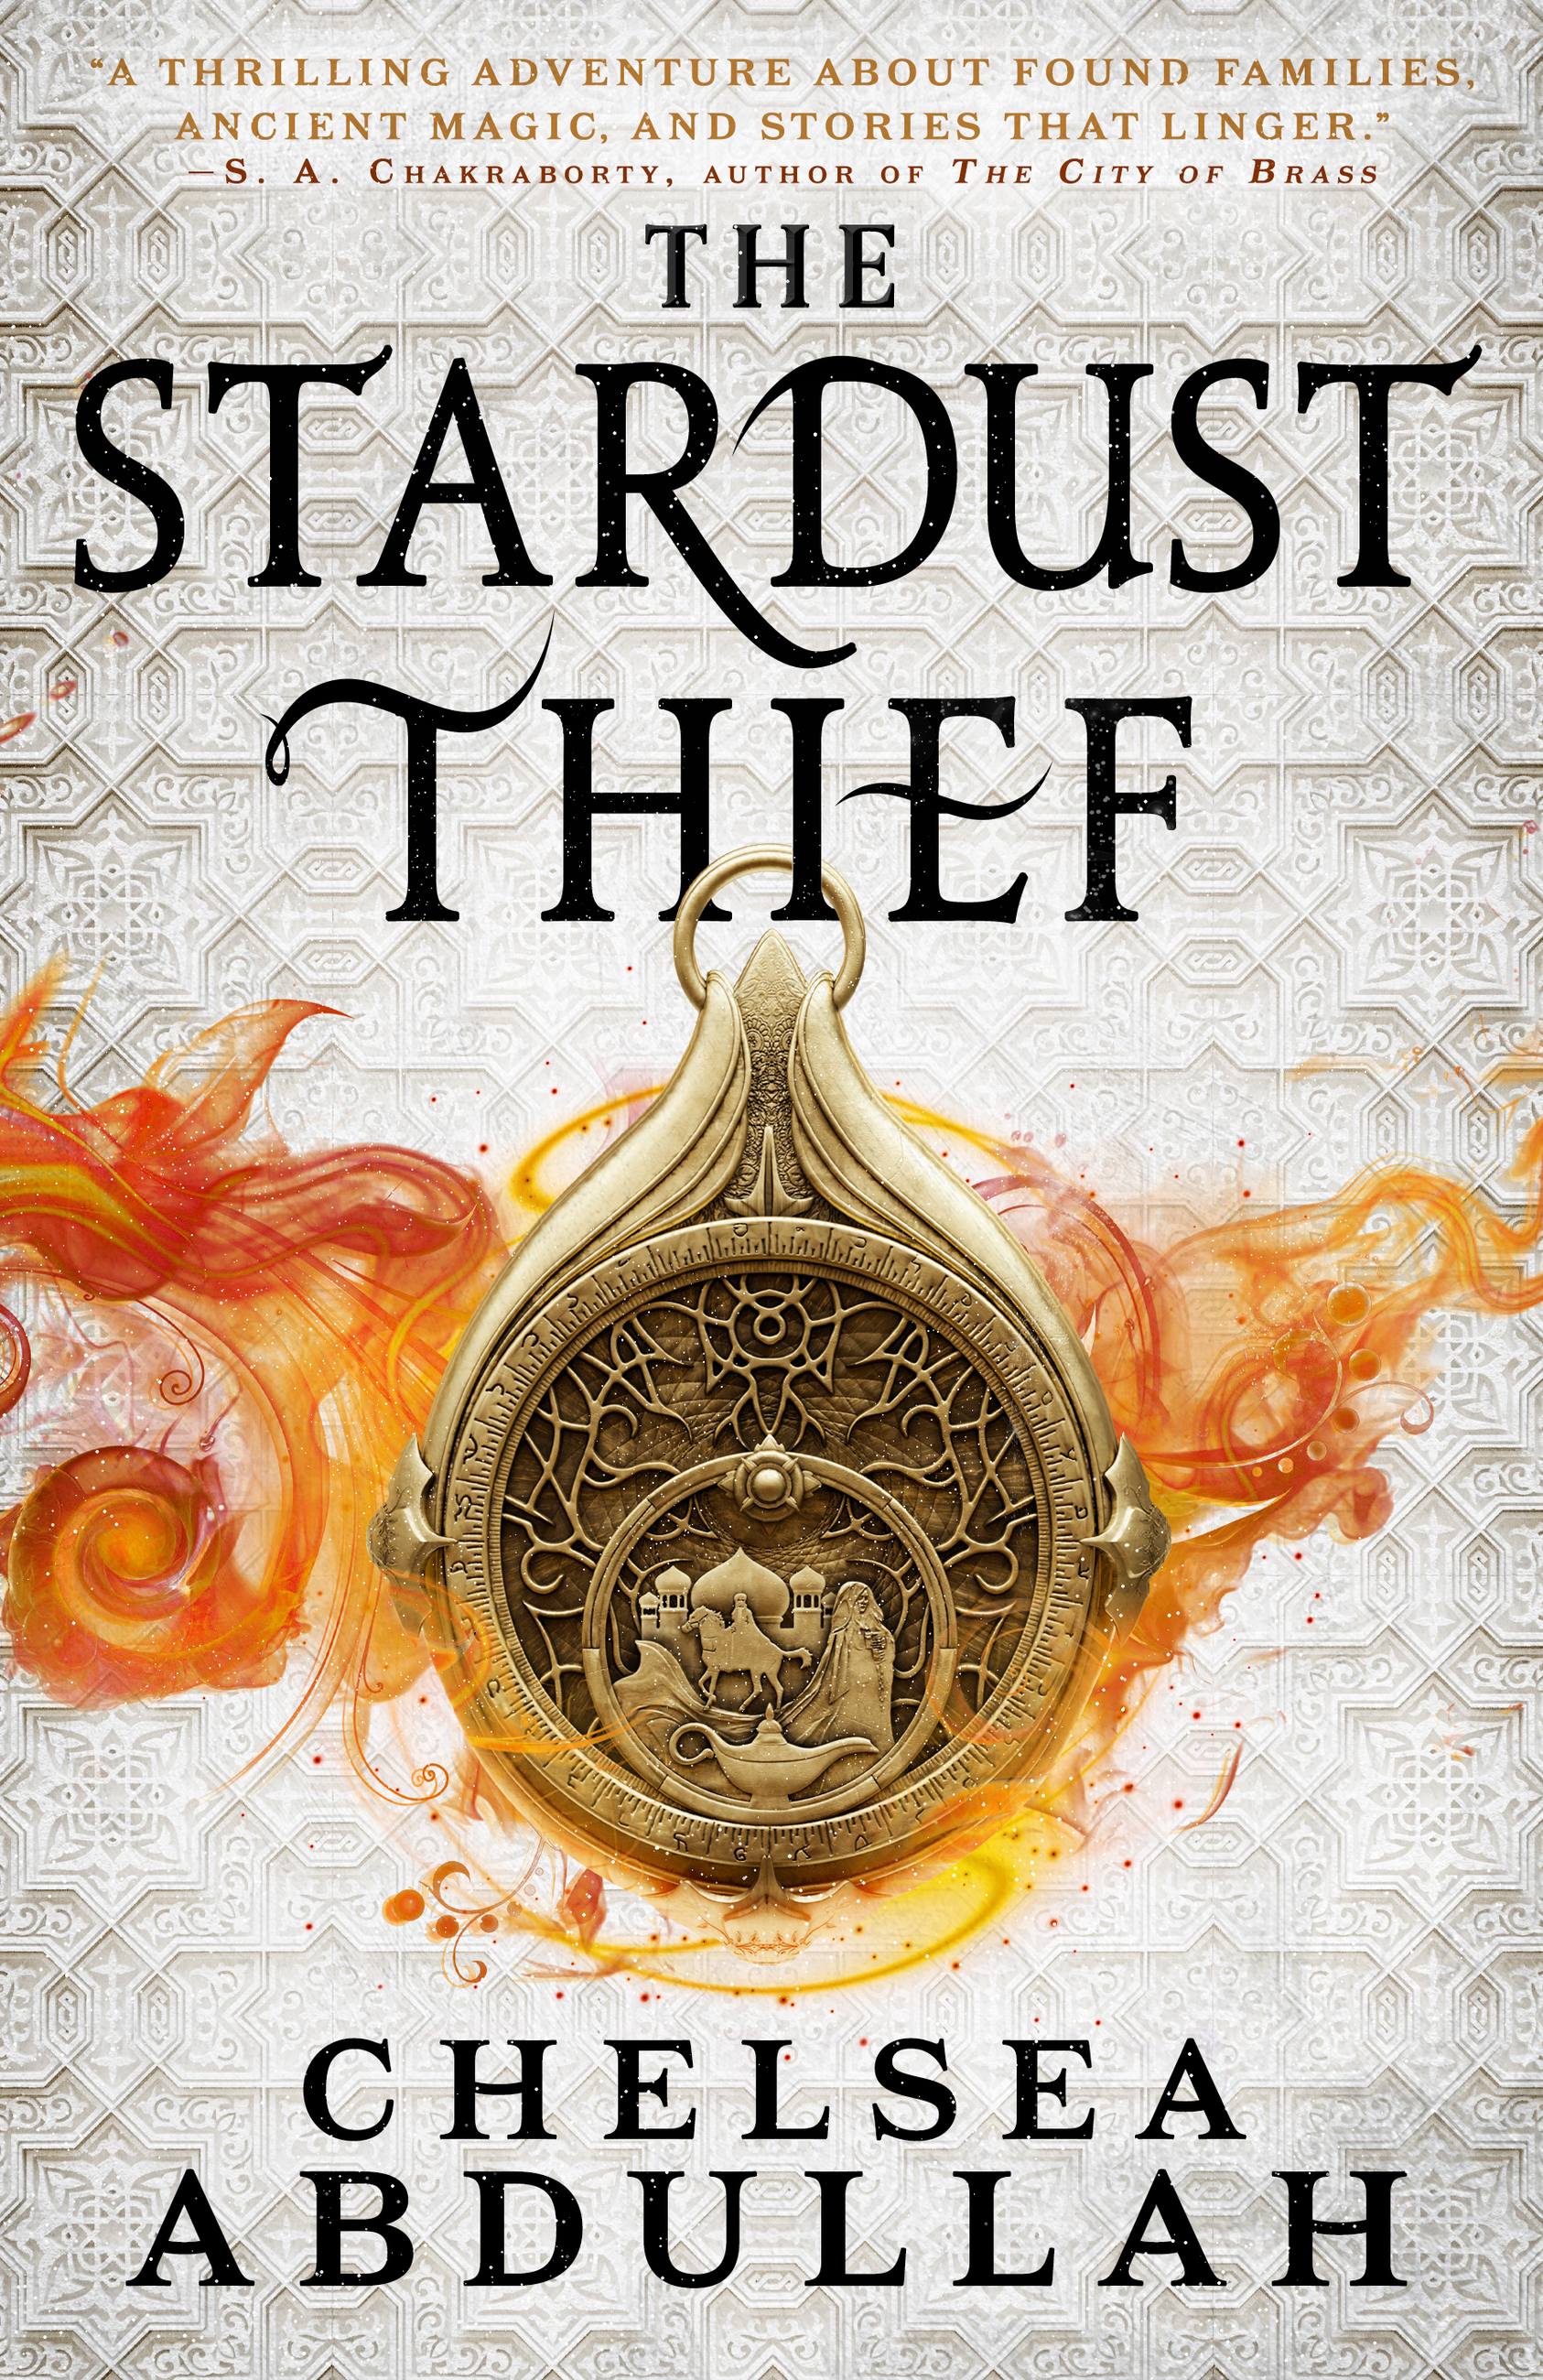 The Stardust Thief by Chelsea Abdullah | Hachette Book Group